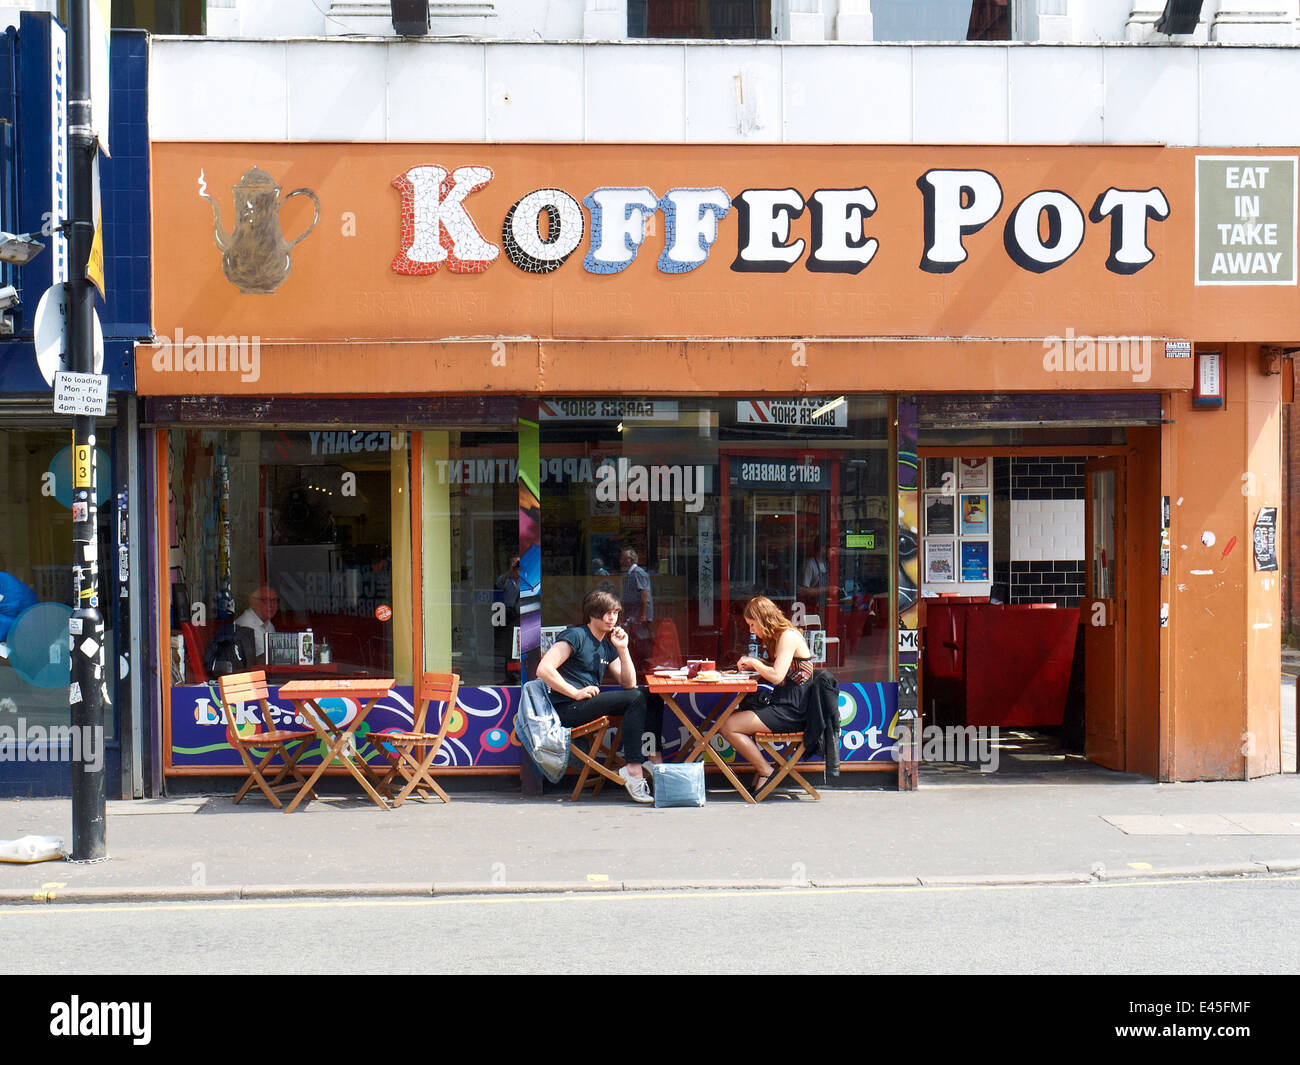 Koffee Pot in Northern Quarter Manchester UK Stock Photo